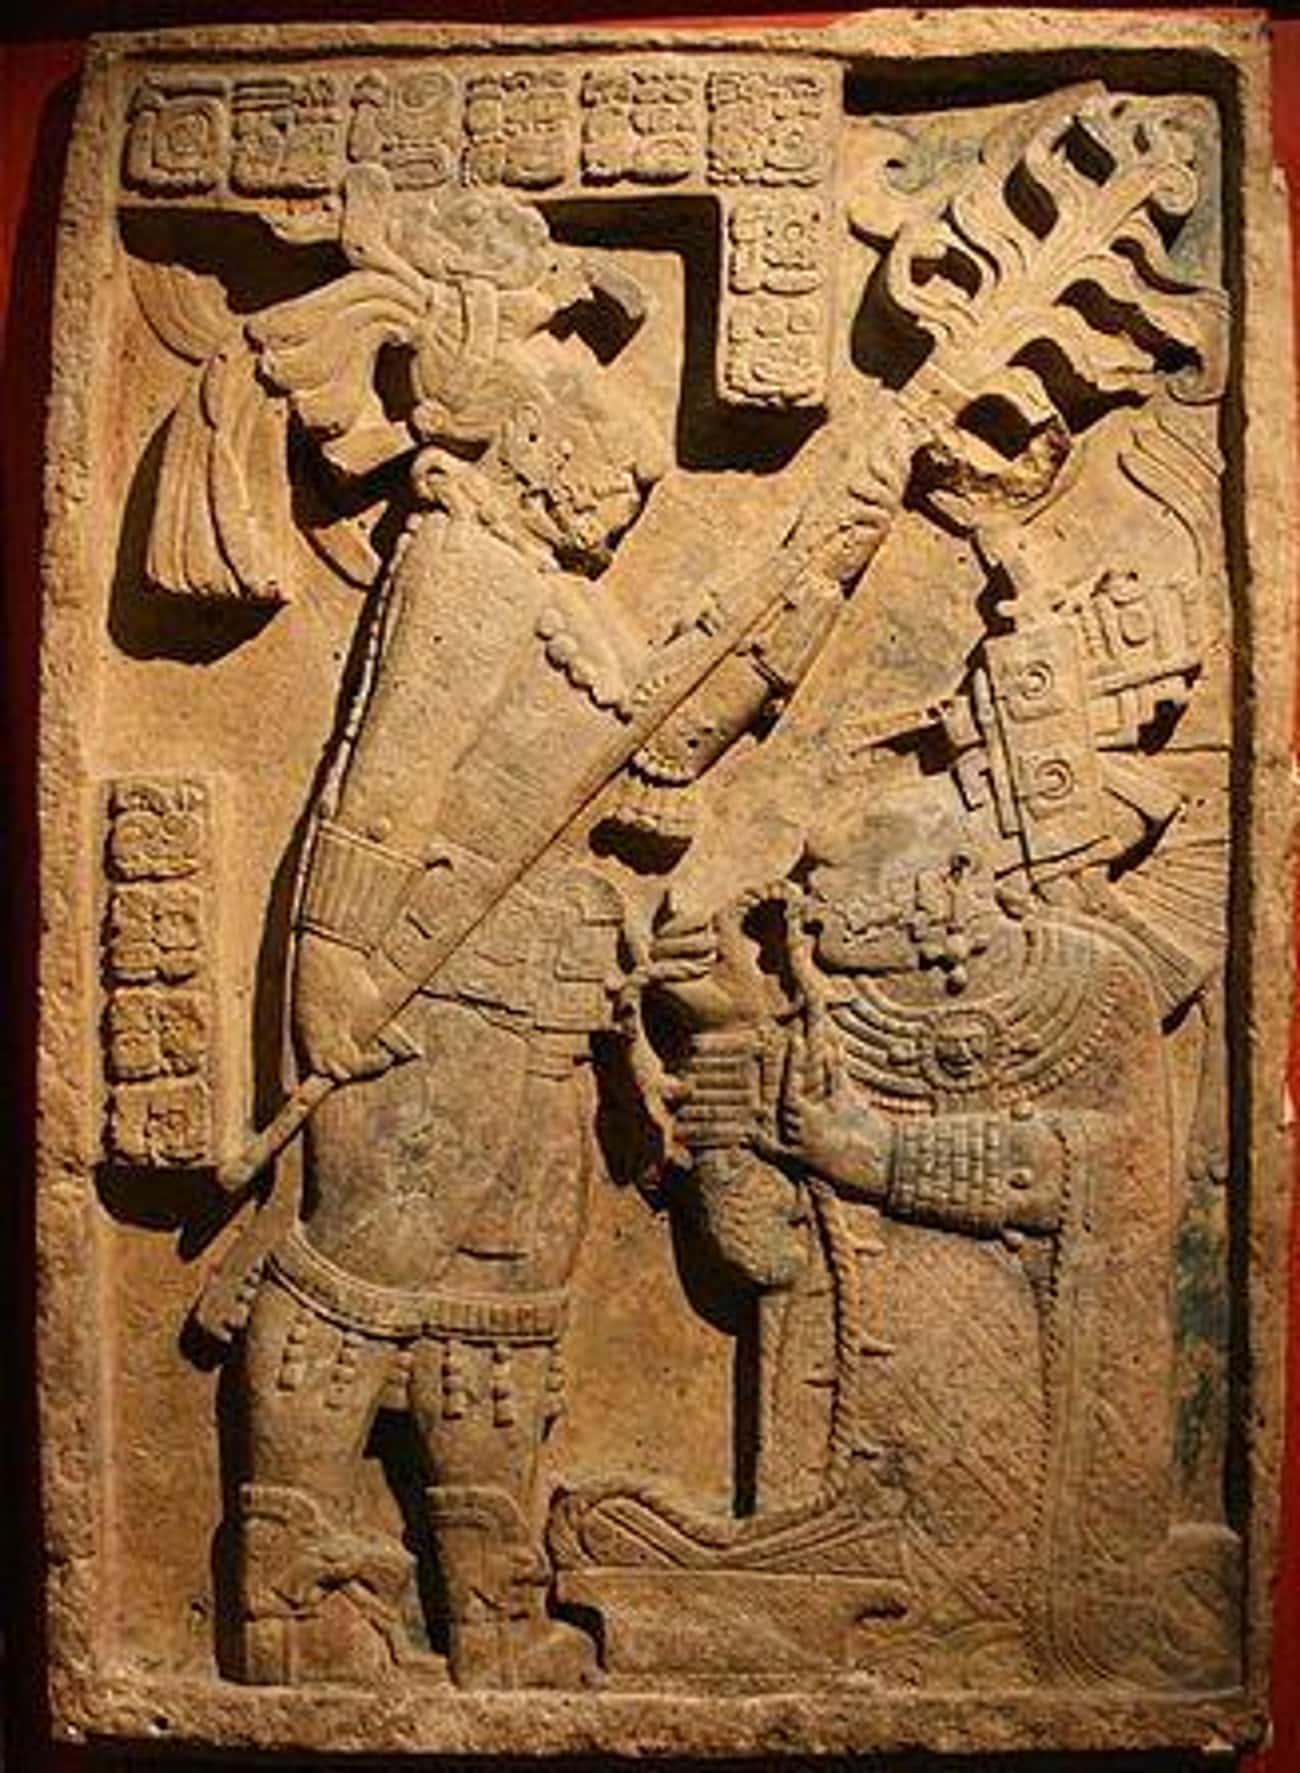 Mayan Pre Battle Insults and Ritual Blood Letting